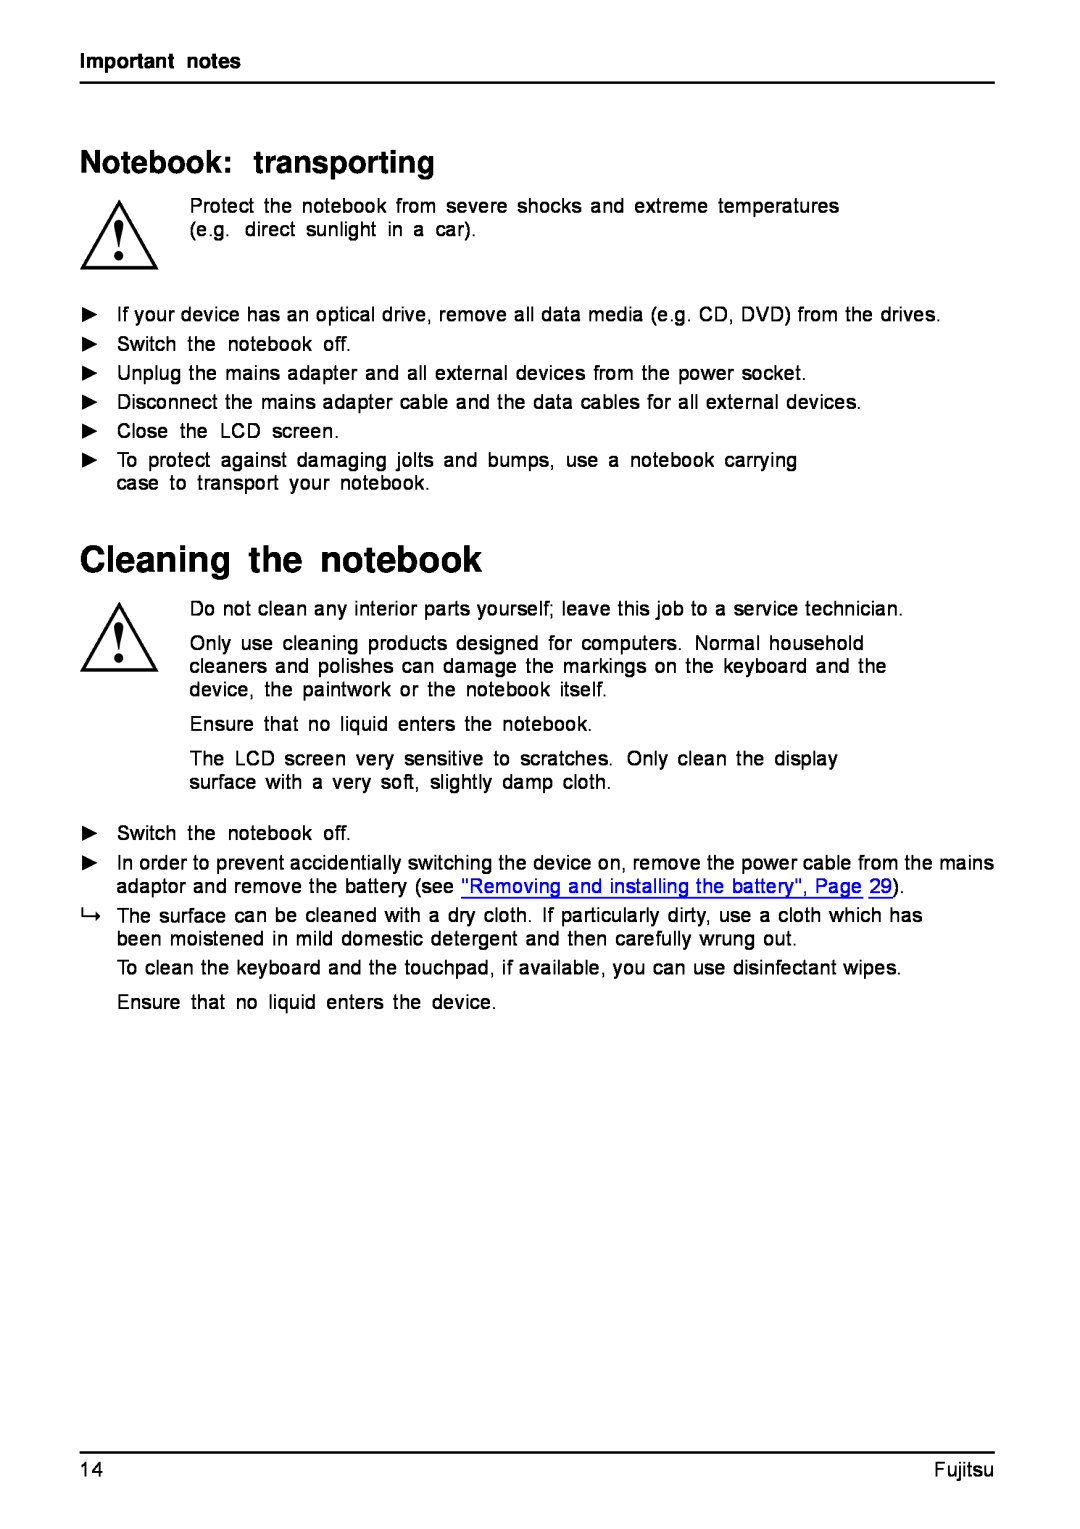 Fujitsu AH512, A512 manual Cleaning the notebook, Notebook transporting, Important notes 